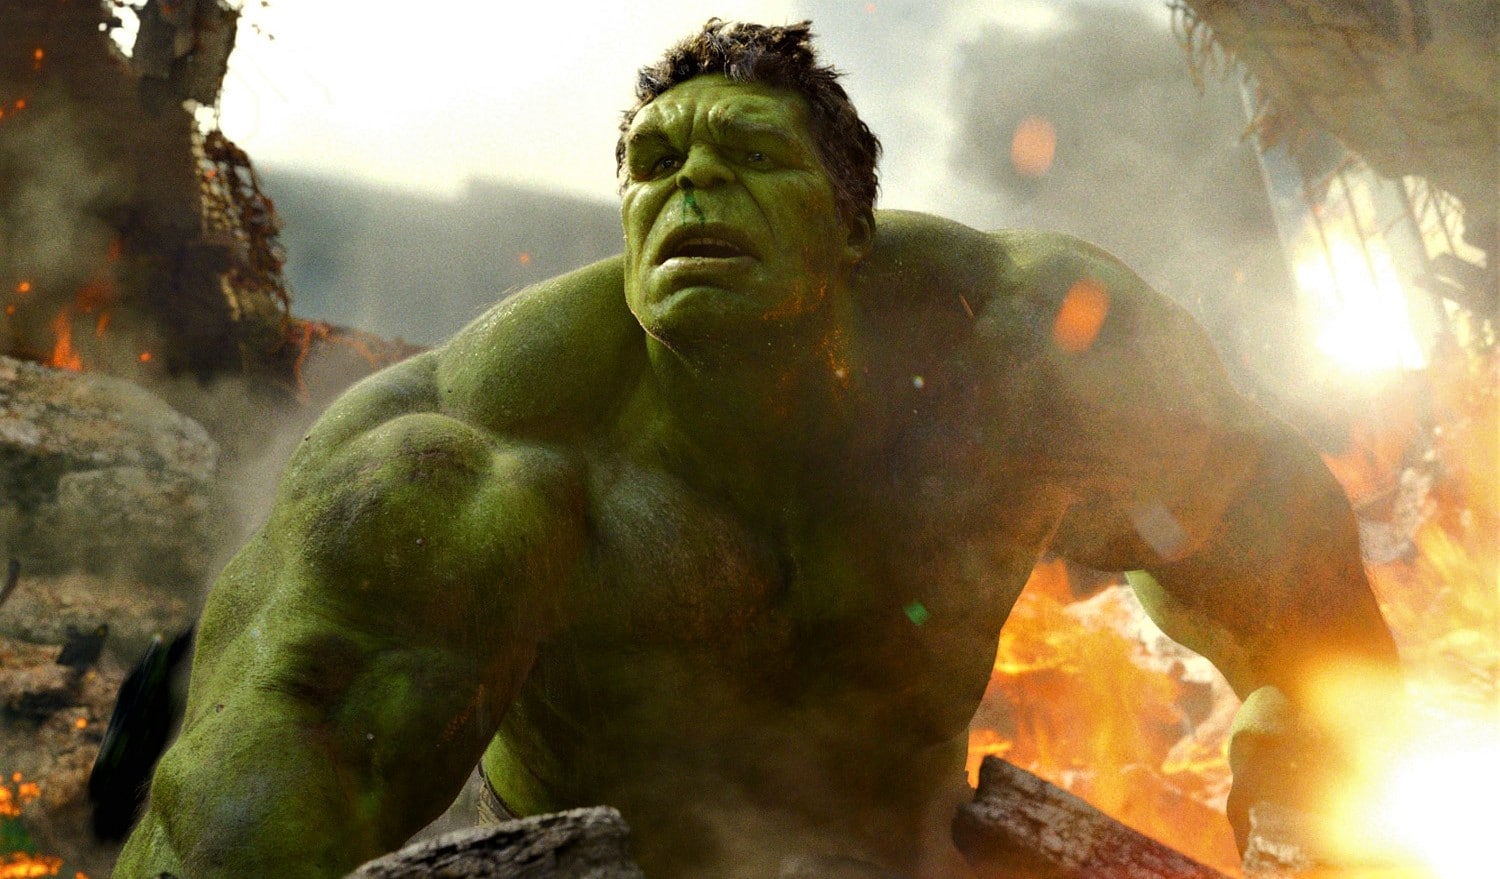 Hulk Shook: 3 Things That Have Truly ‘Frightened’ The Hulk